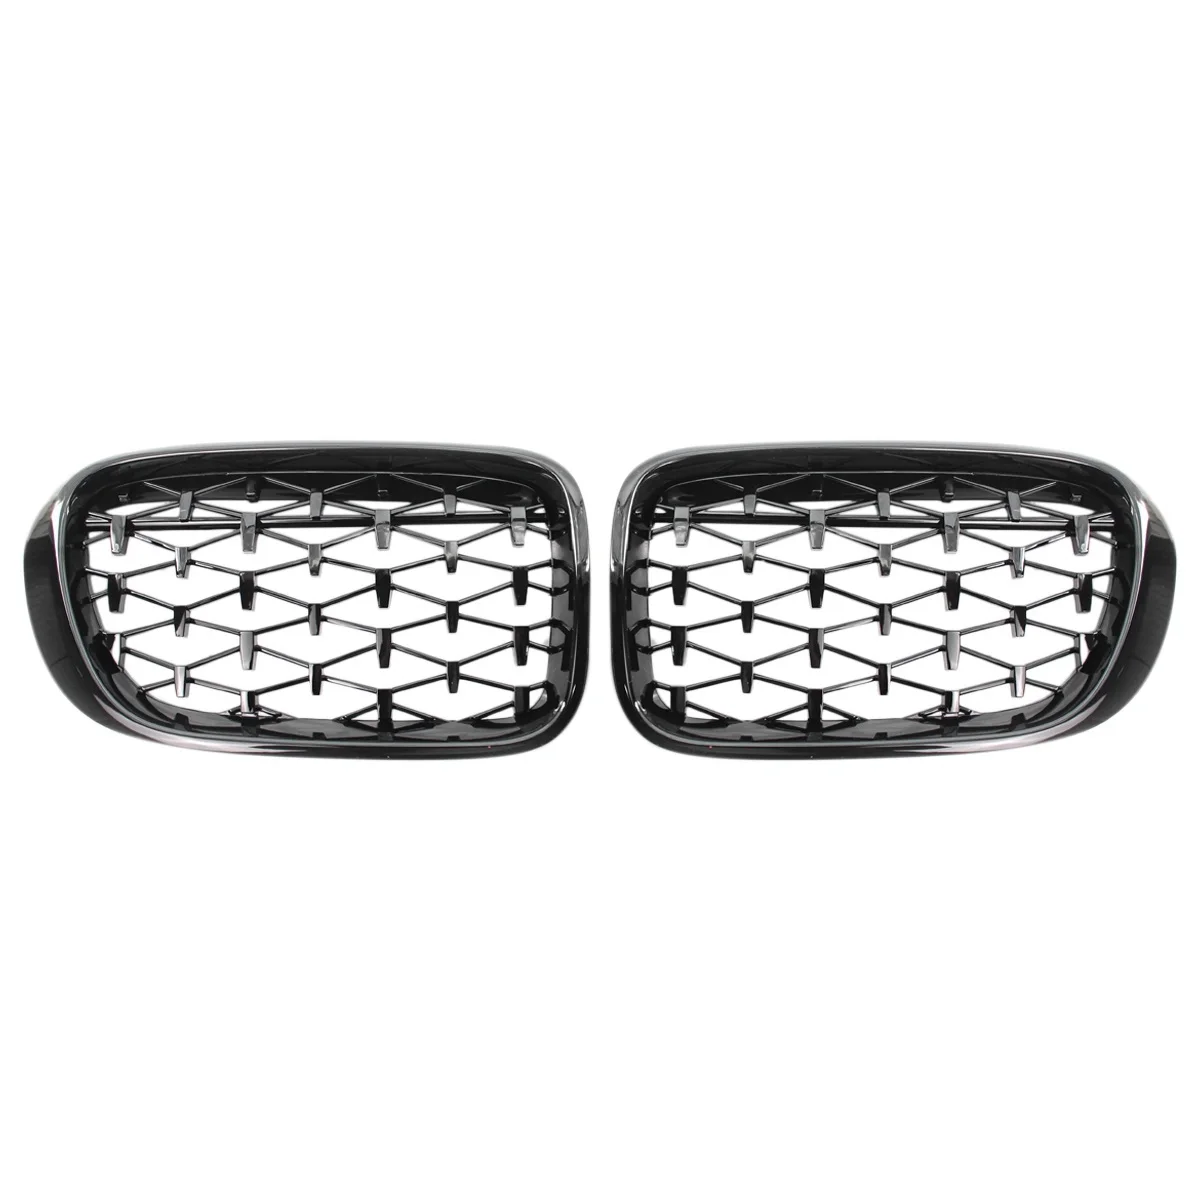 

Black Diamond Style Car Front Kidney Grilles Grill for -BMW X3 F25 X4 F26 2014-2018 Car Racing Grills